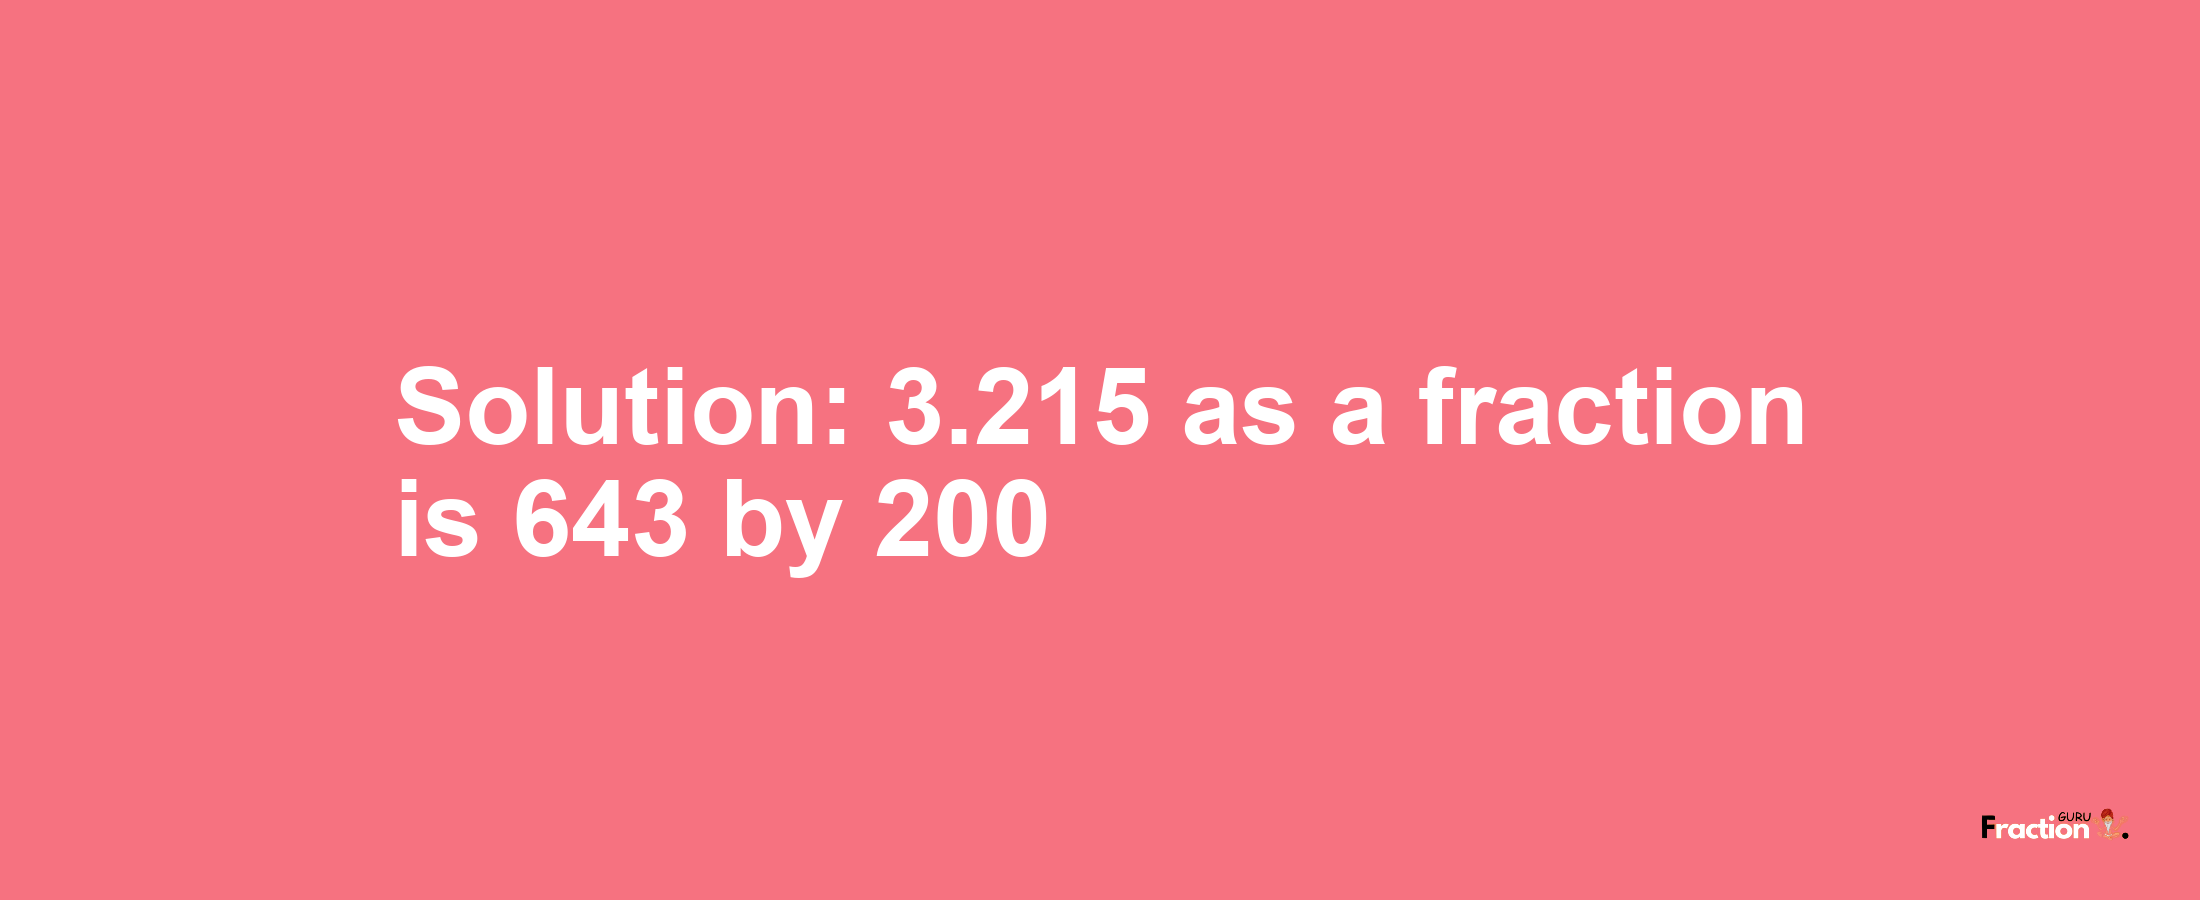 Solution:3.215 as a fraction is 643/200